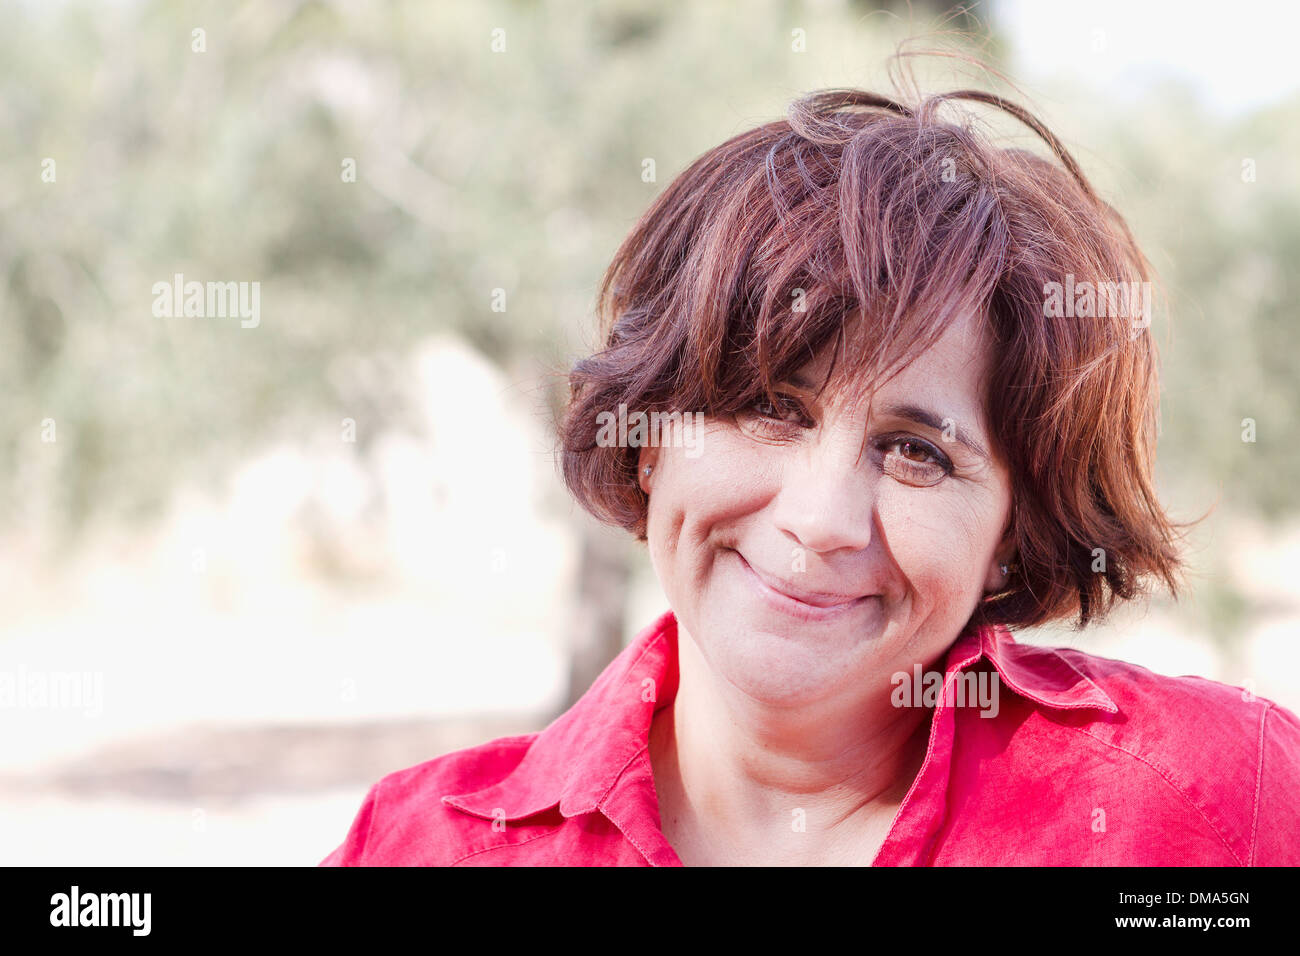 Lifestyle of a Smiling woman Stock Photo